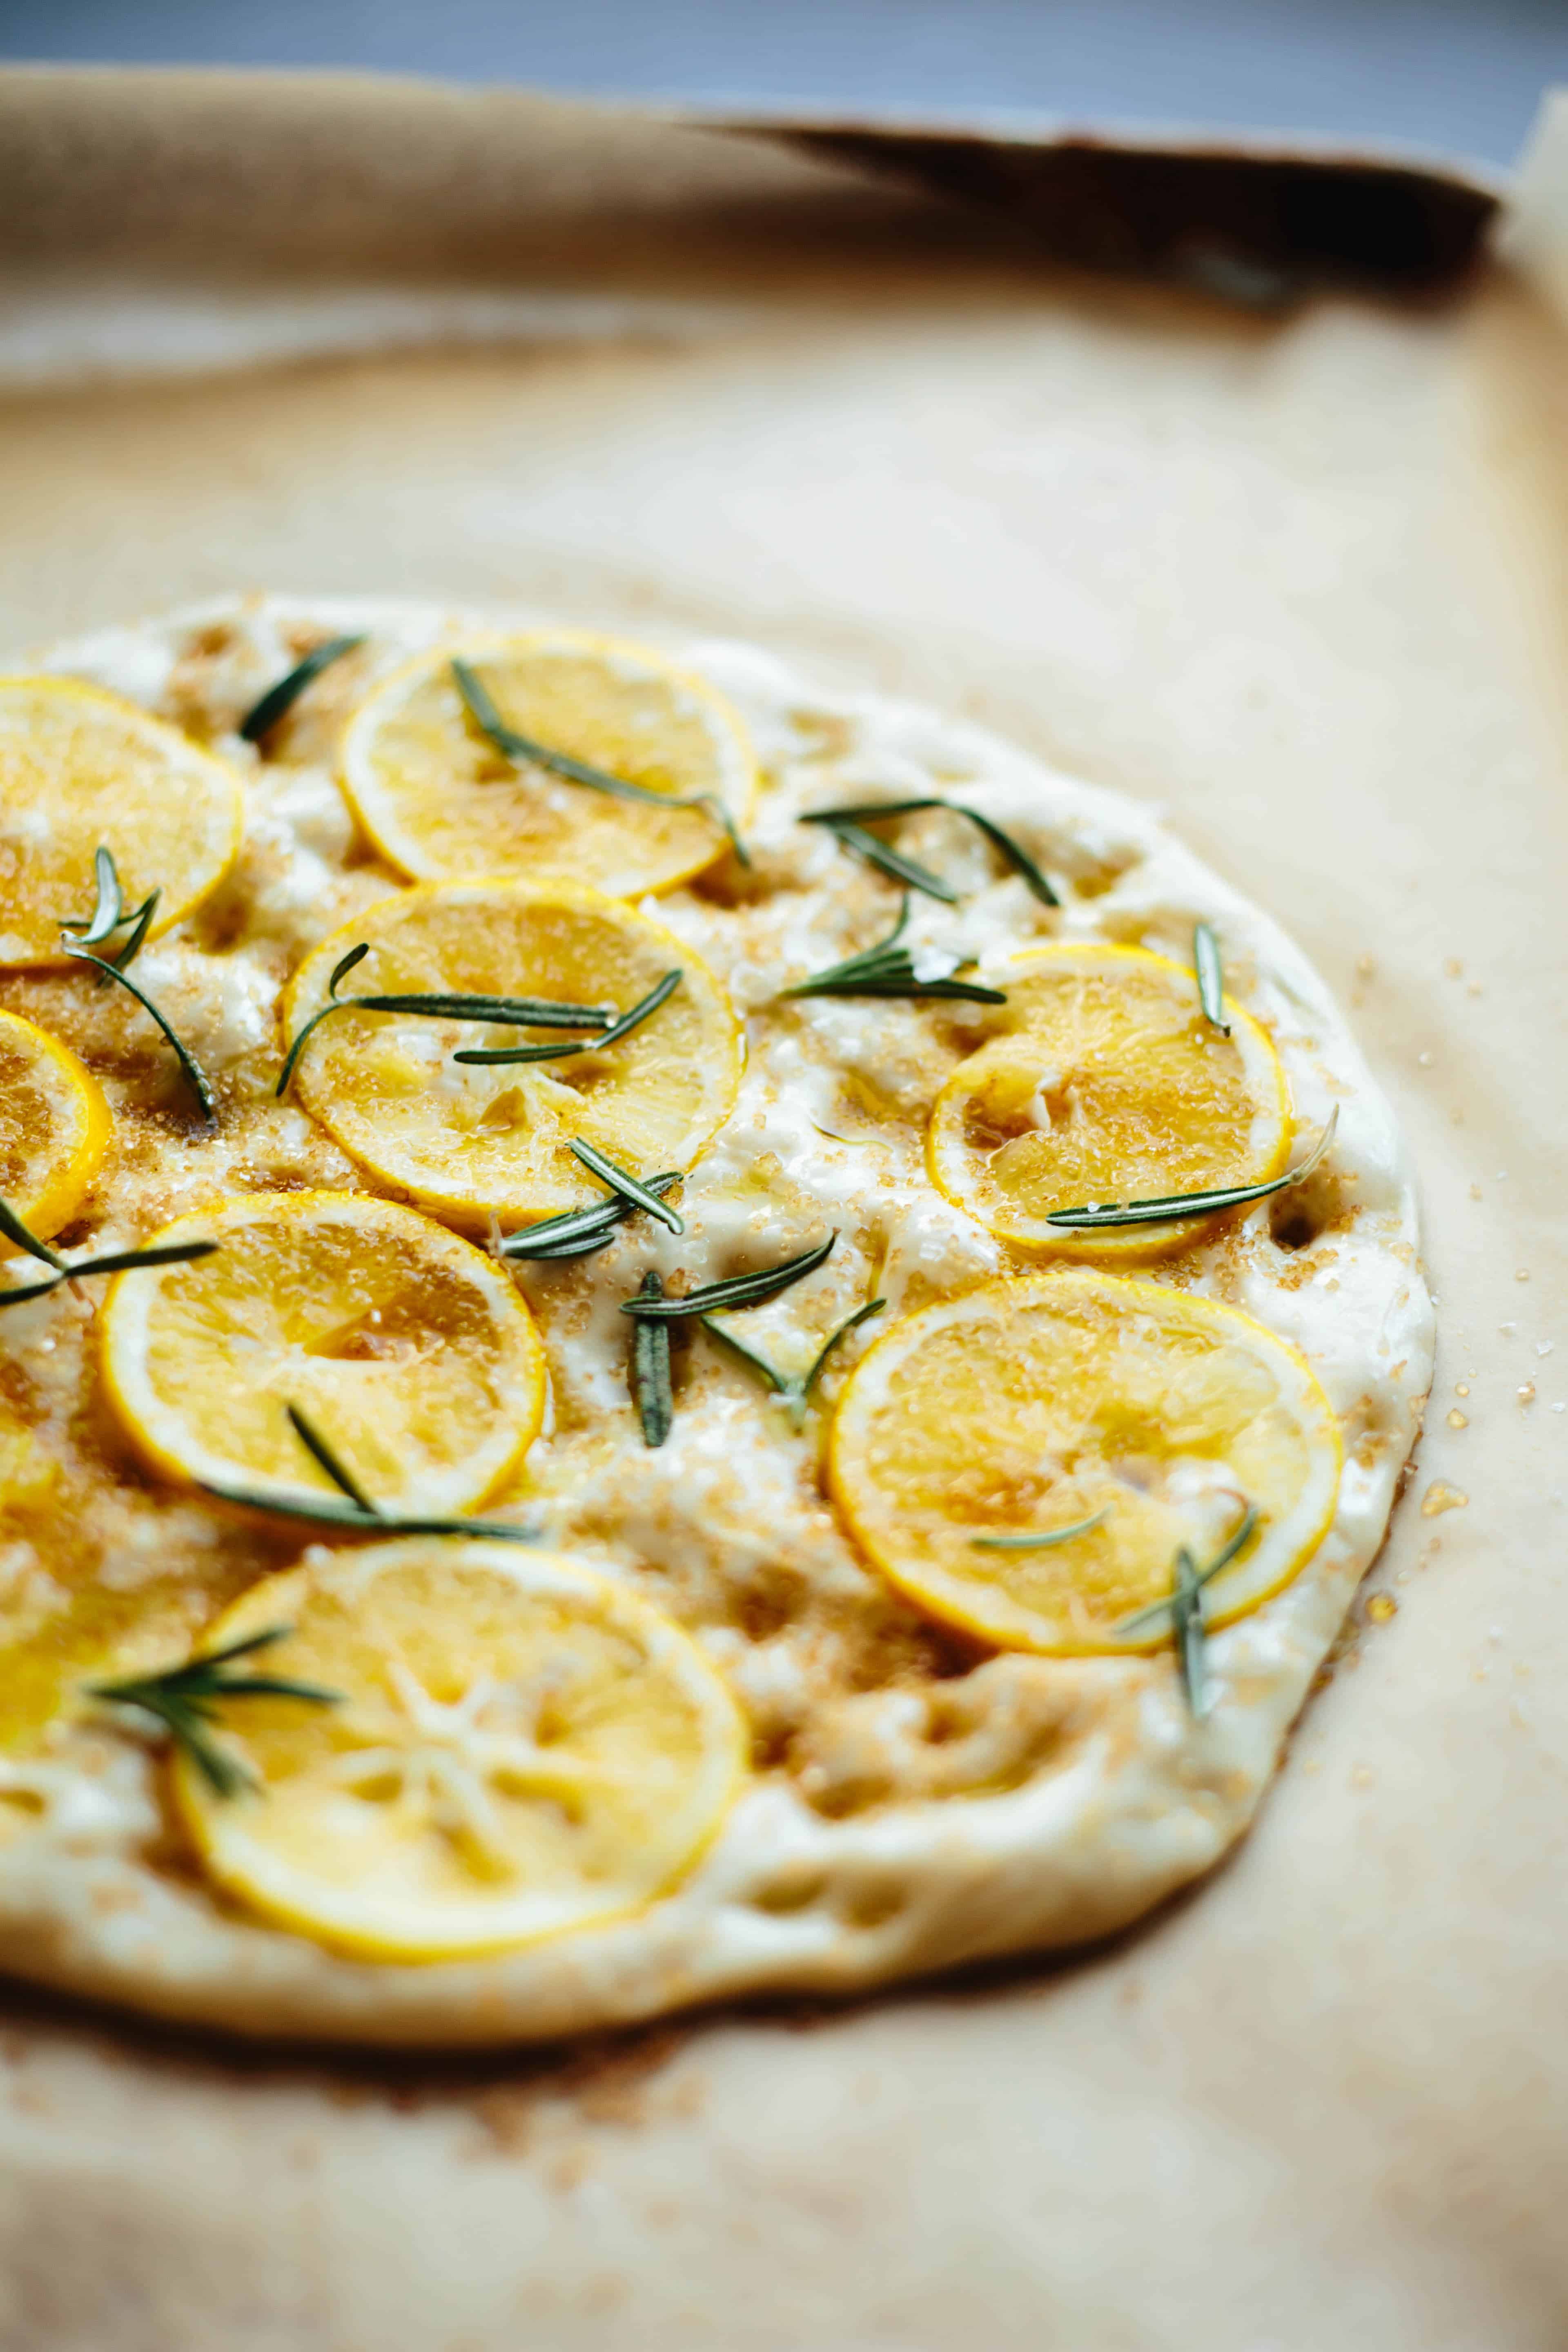 A round focaccia dough with lemon slices and herbs pressed into the top.